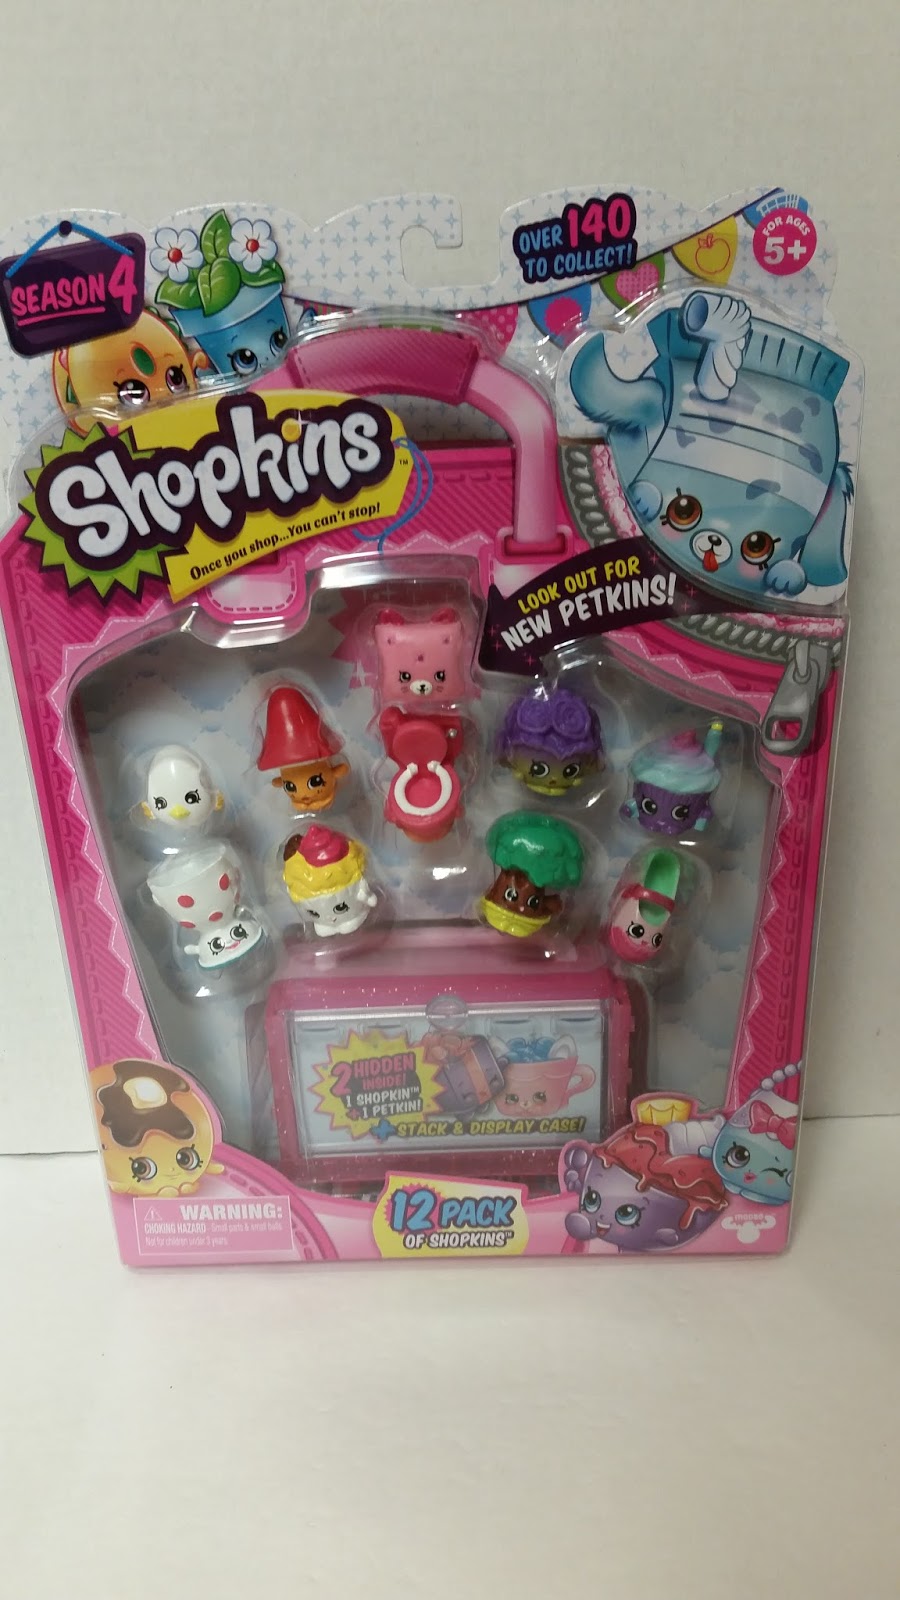 Action Figures Shopkins, Shoppings Toy